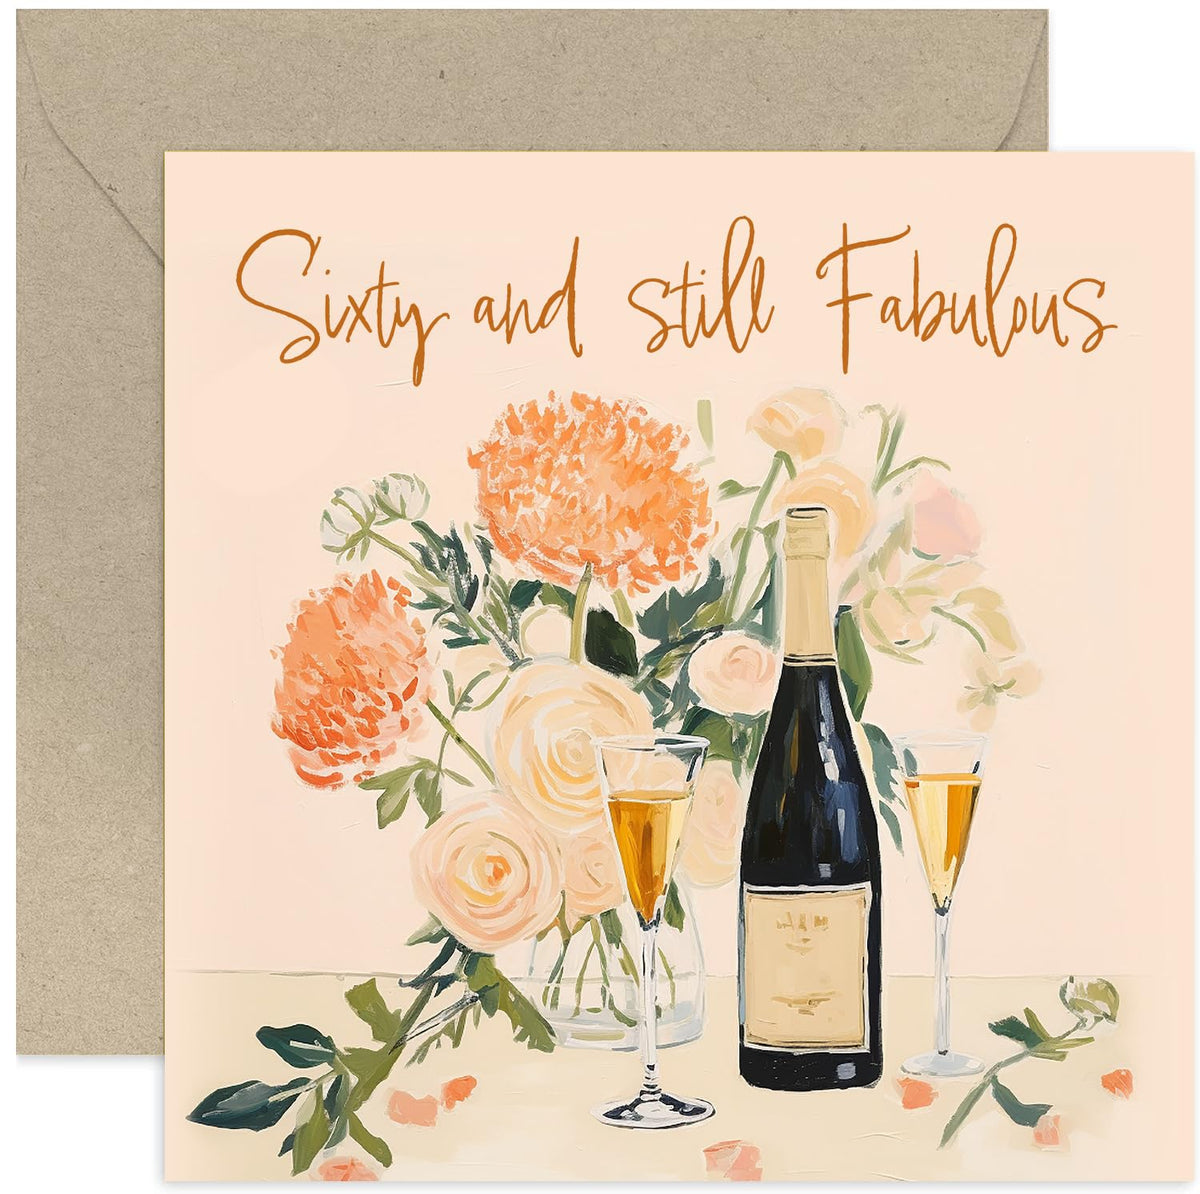 Old English Co. Sixty and Still Fabulous Birthday Card for Her - Champagne Floral Birthday Card for Women - 60th Birthday Card for Friend, Sister, Auntie, Mum   Blank Inside Envelope